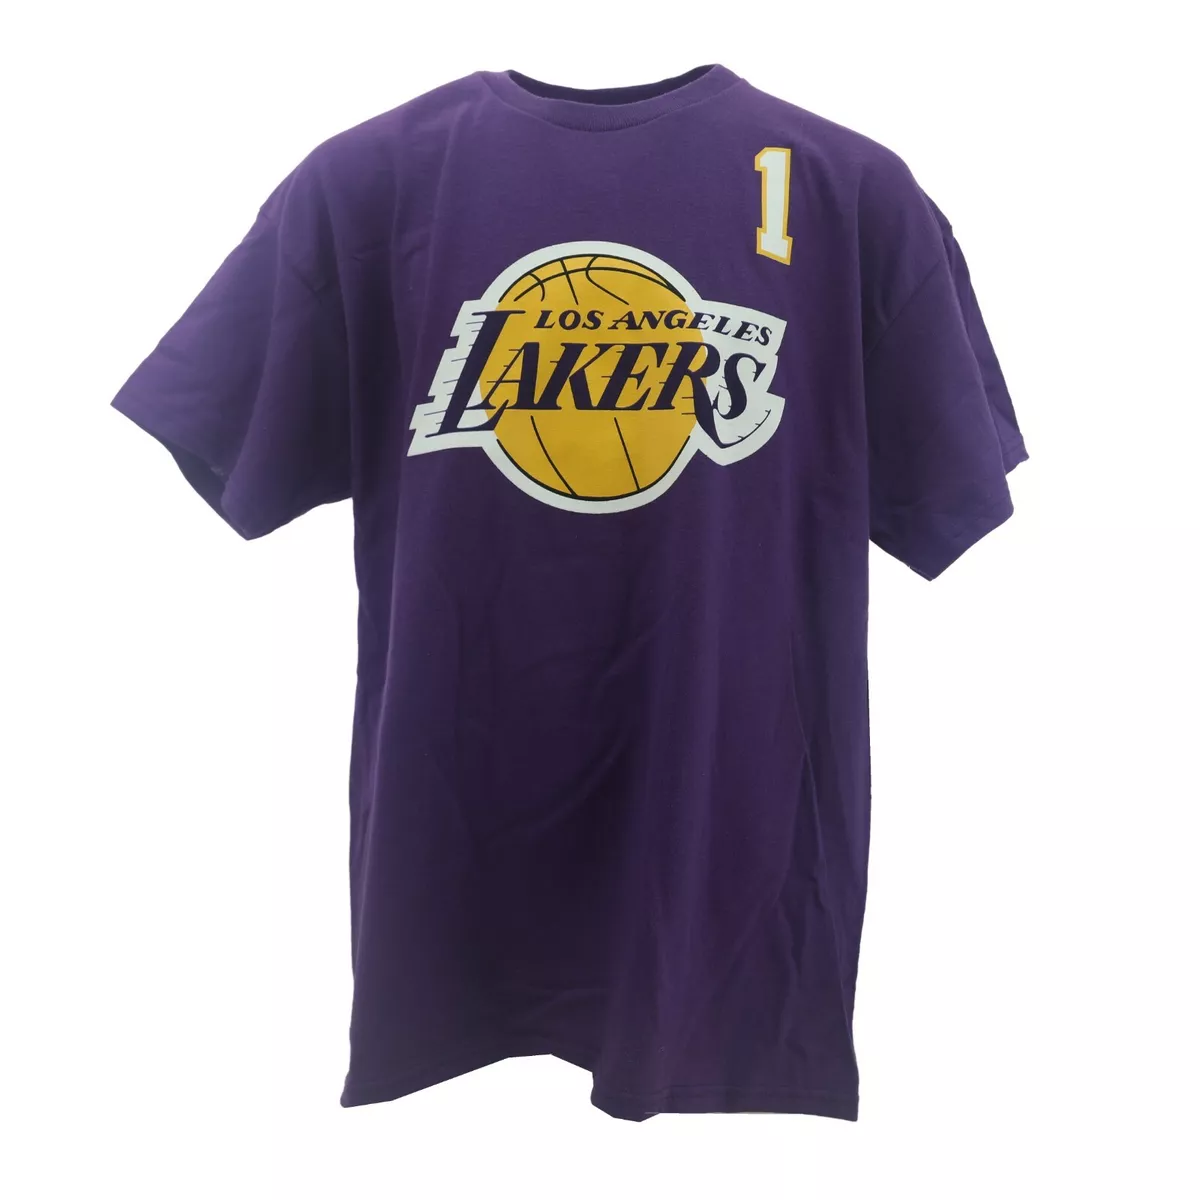 Los Angeles Lakers Official NBA Apparel Kids Youth Size Russell T-Shirt New  Tags